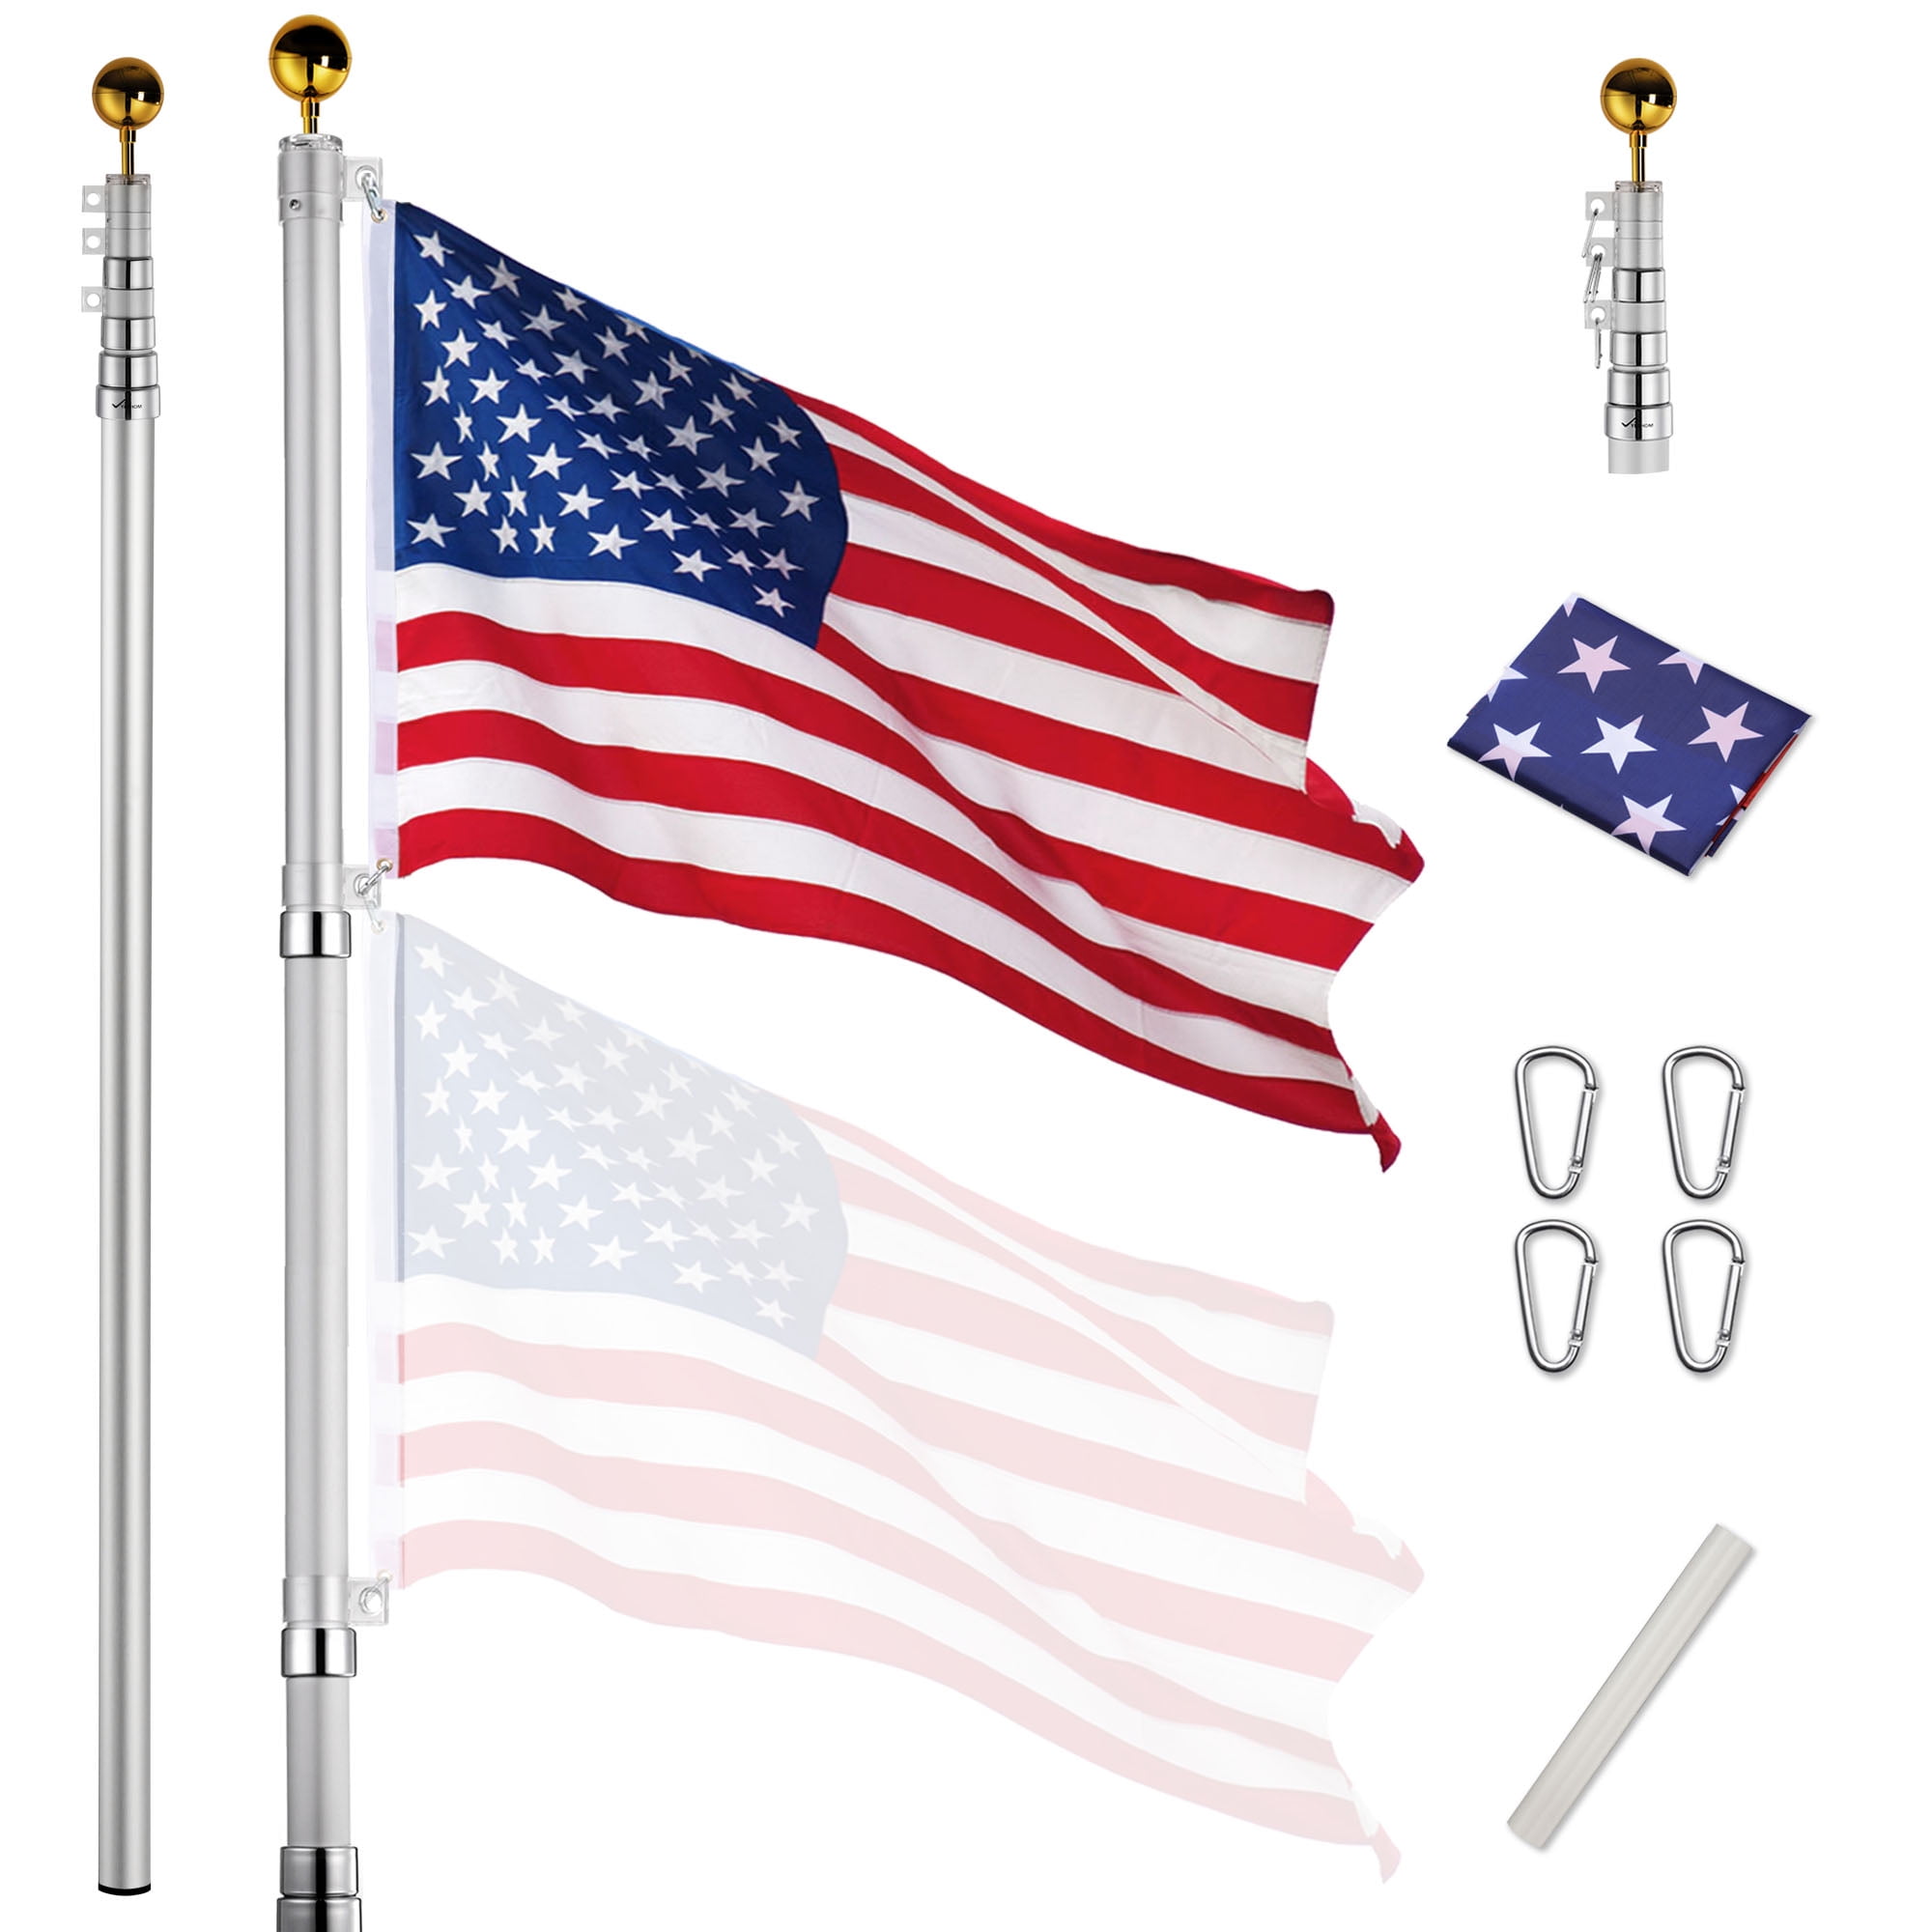 20ft Heavy Duty 16 Gauge Aluminum Telescopic Flagpole Set with 3x5 US American Polyester Flag & Golden Ball Topper for Residential Outdoor or Commercial,Can Fly 2 Flag Telescoping Flag Pole Kit 